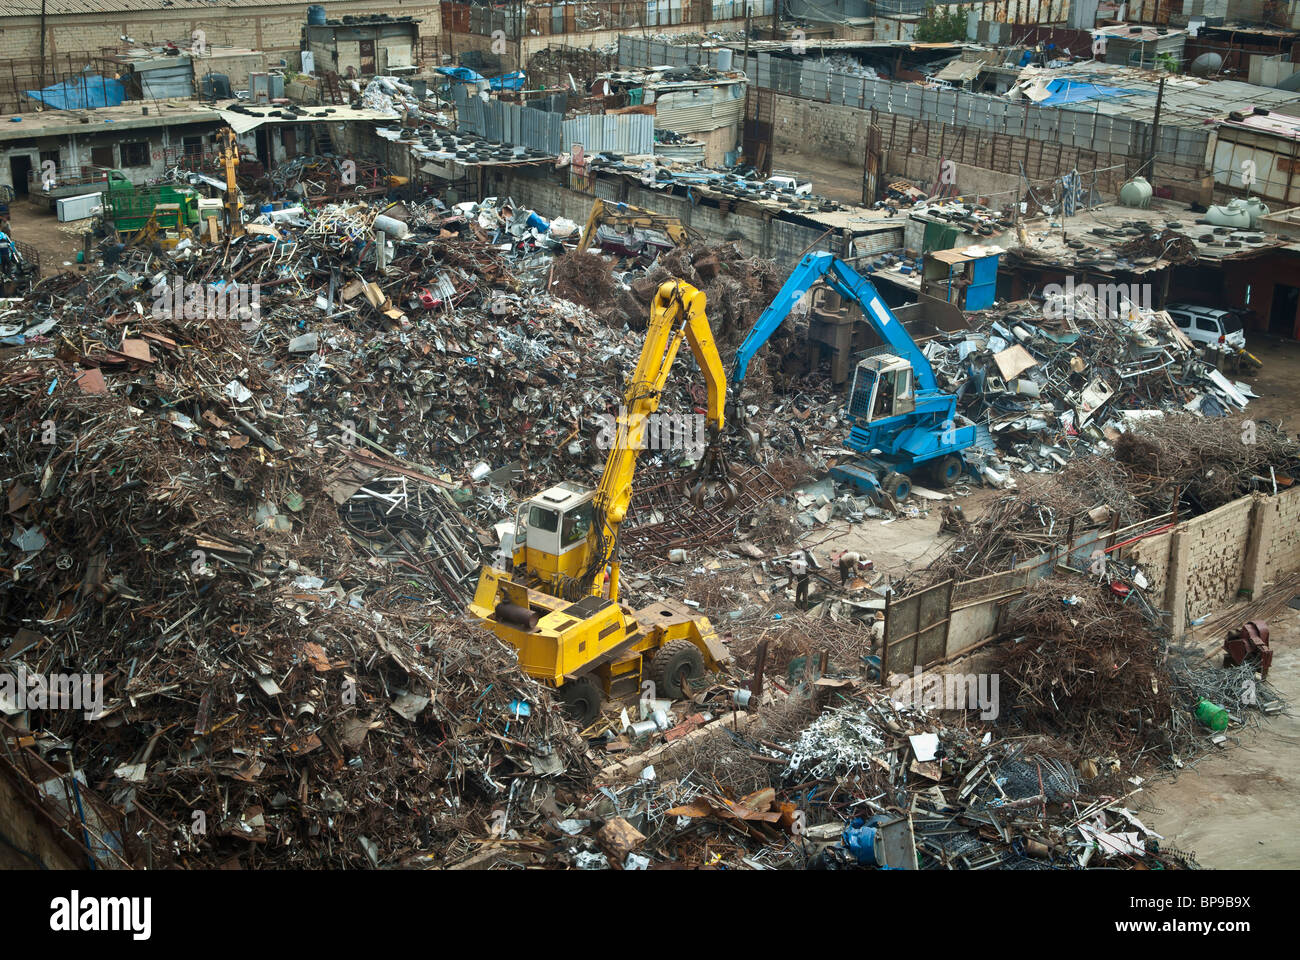 Metal scrapyard in recycling centre Beirut Lebanon Middle East Stock Photo